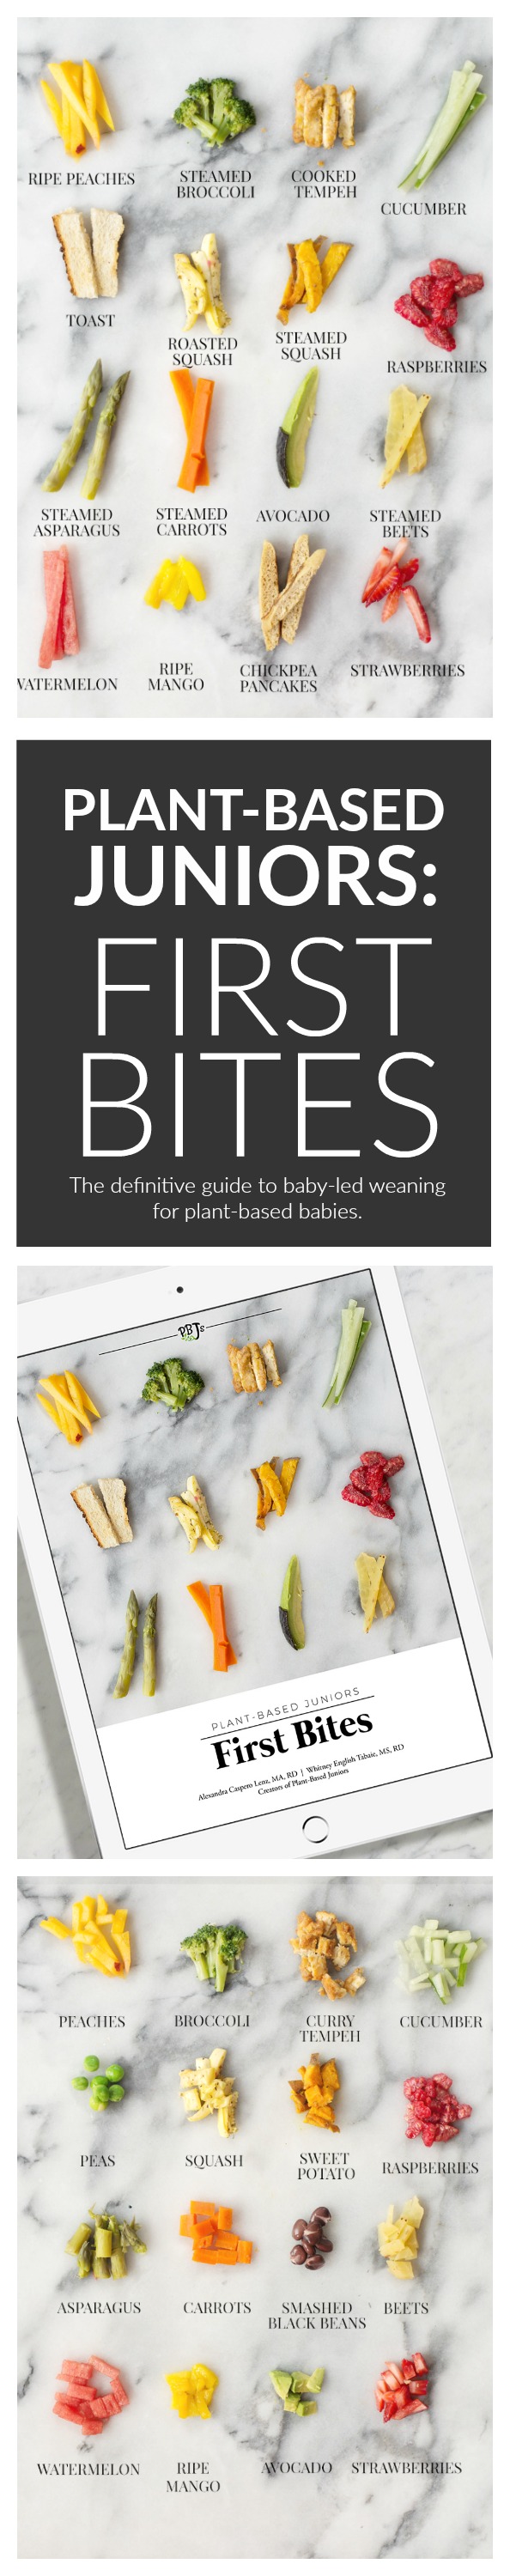 Plant-Based Juniors First Bites - the definitive guide to baby-led weaning for plant-based babies.